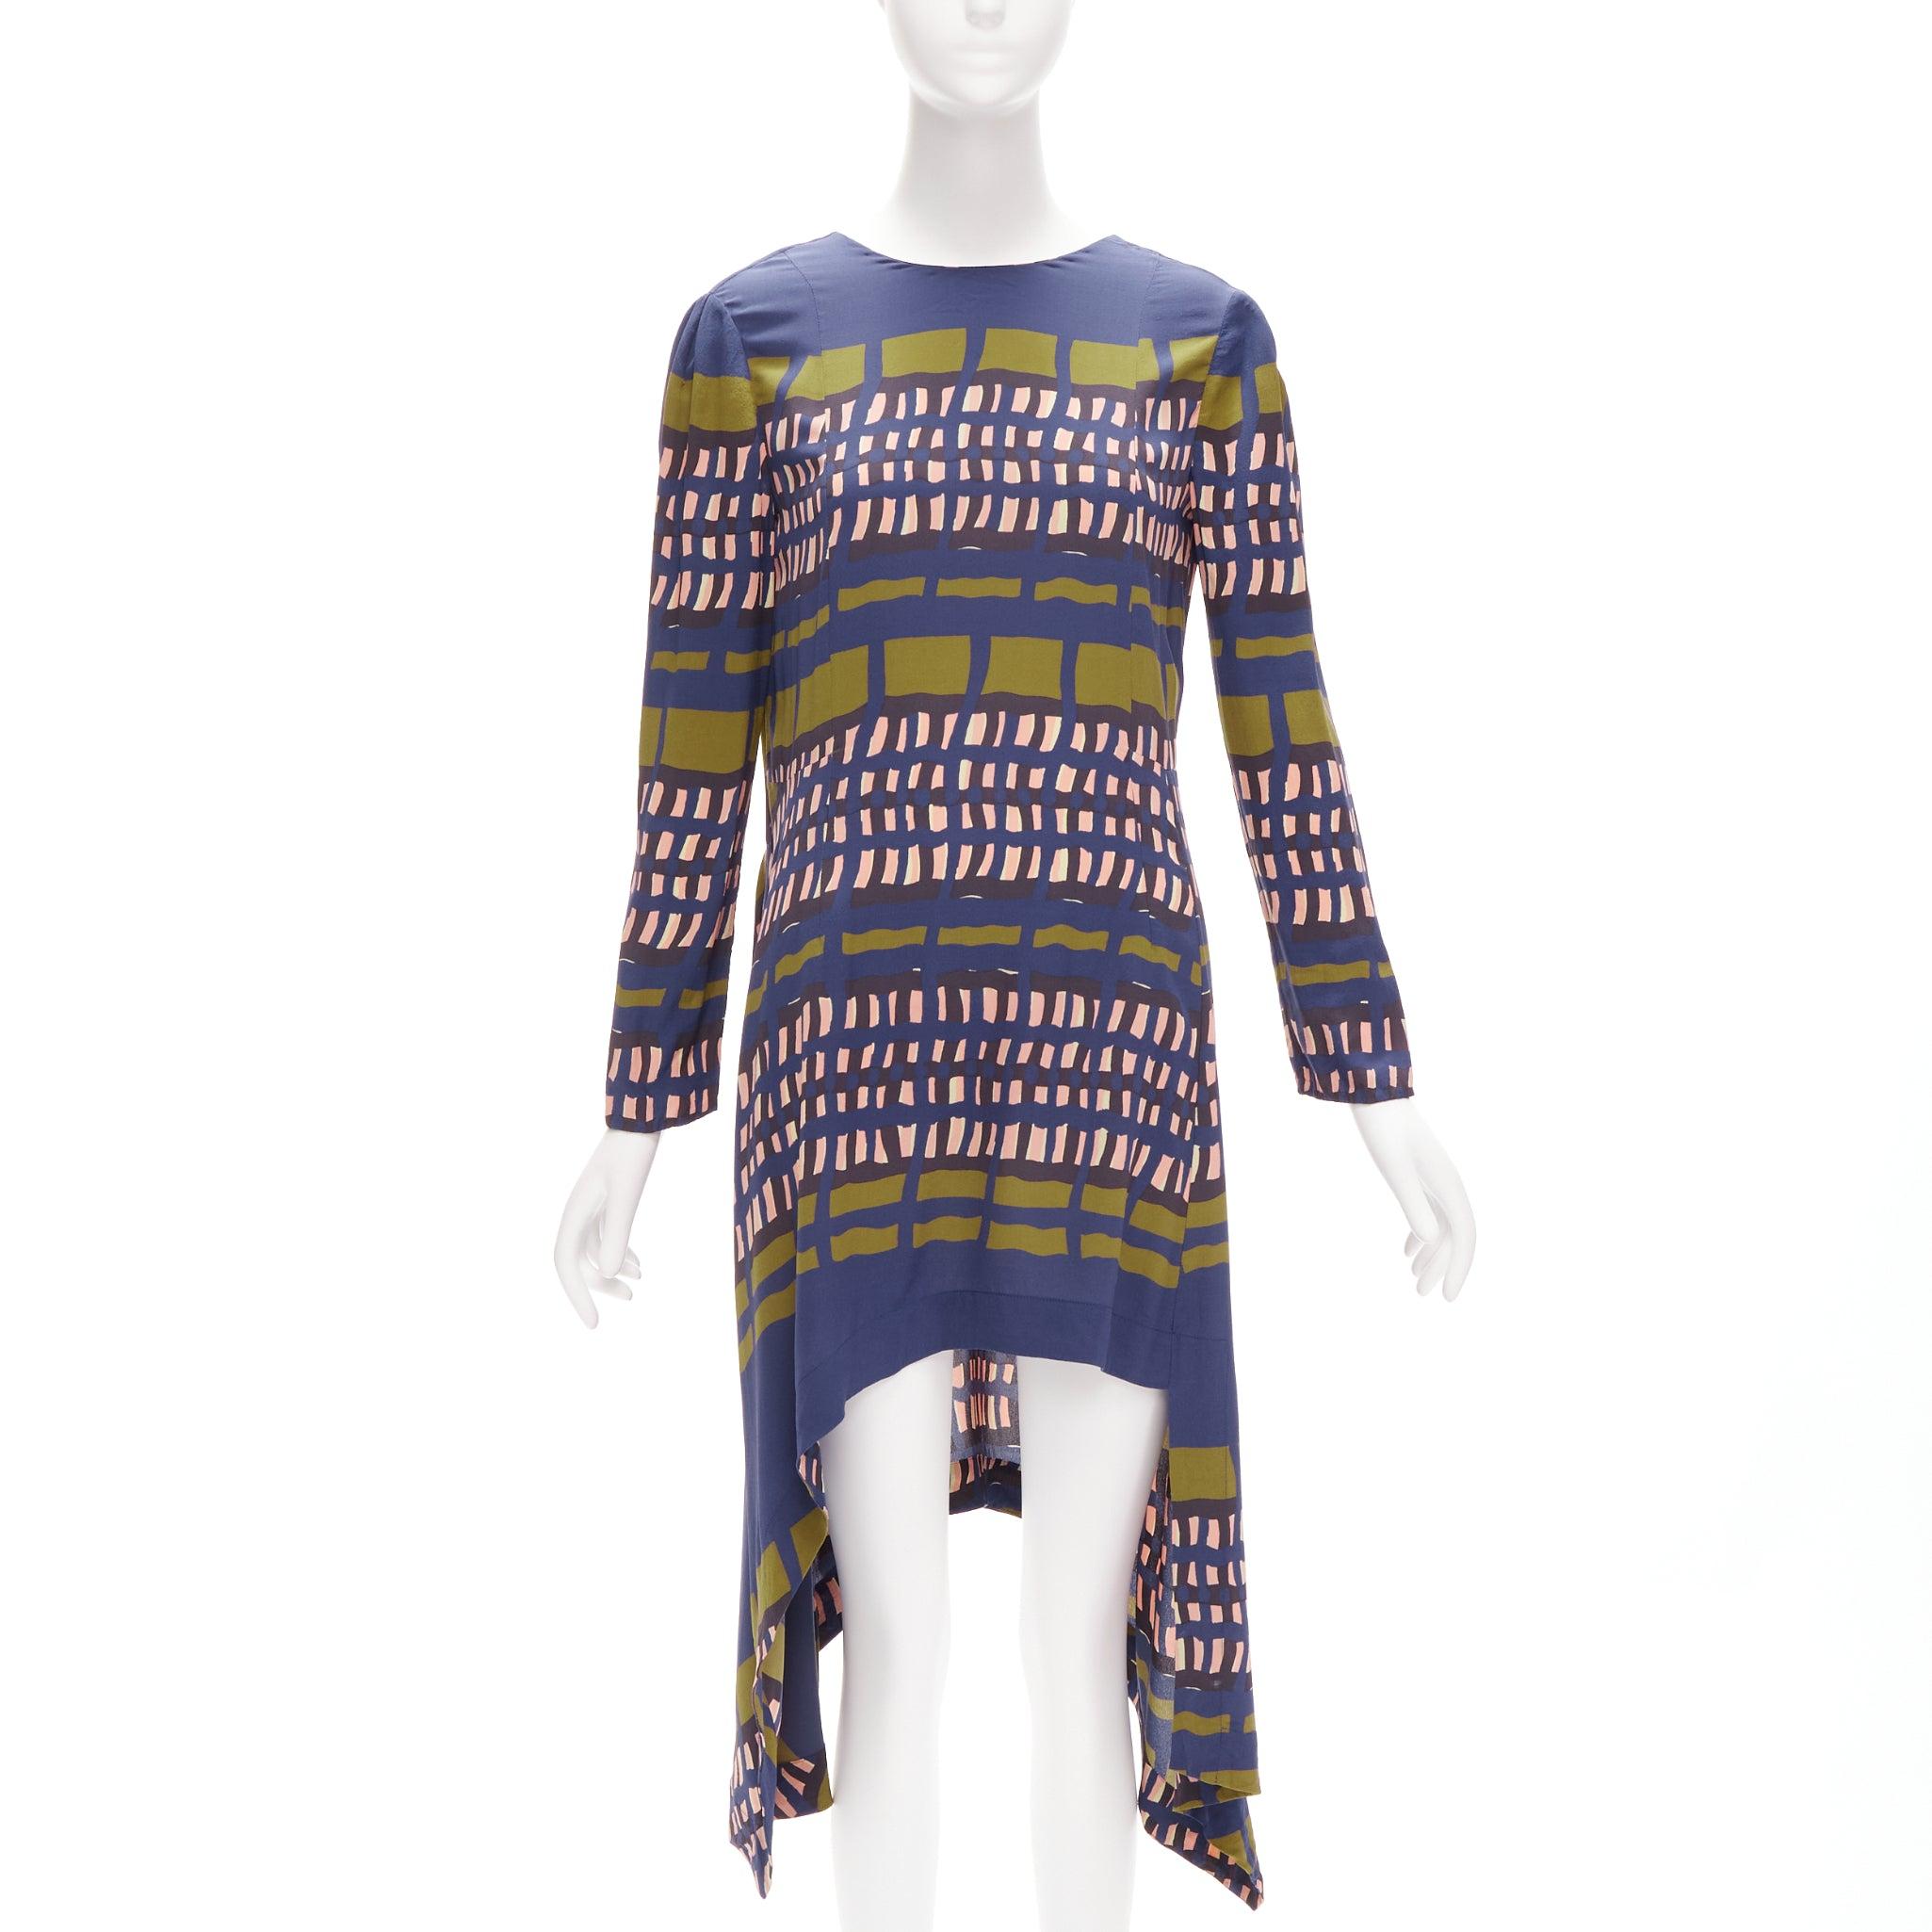 MARNI 100% silk navy khaki geometric print handkerchief high low dress IT38 XS
Reference: CELG/A00286
Brand: Marni
Material: Silk
Color: Multicolour
Pattern: Geometric
Closure: Slip On
Made in: Italy

CONDITION:
Condition: Very good, this item was